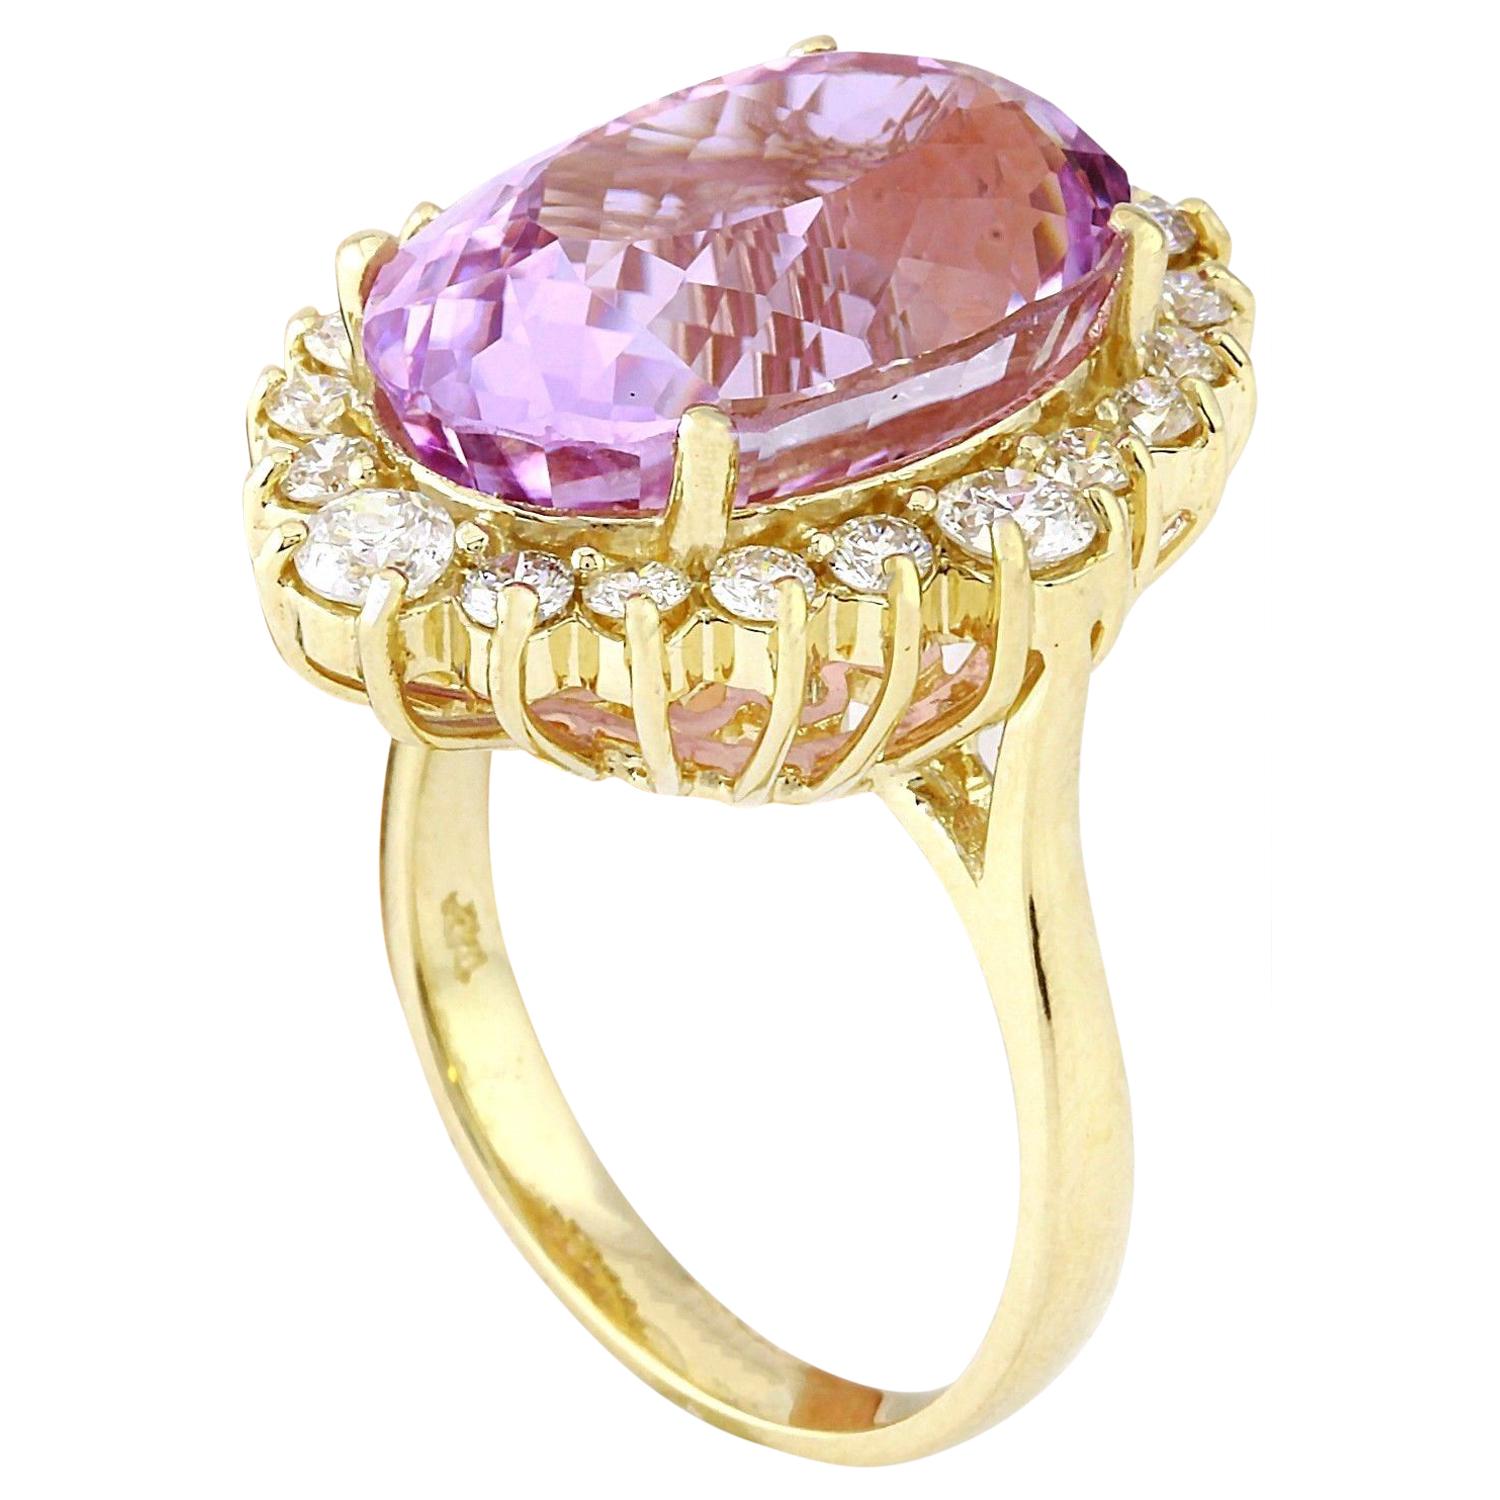 Oval Cut Exquisite Natural Kunzite Diamond Ring In 14 Karat Solid Yellow Gold  For Sale